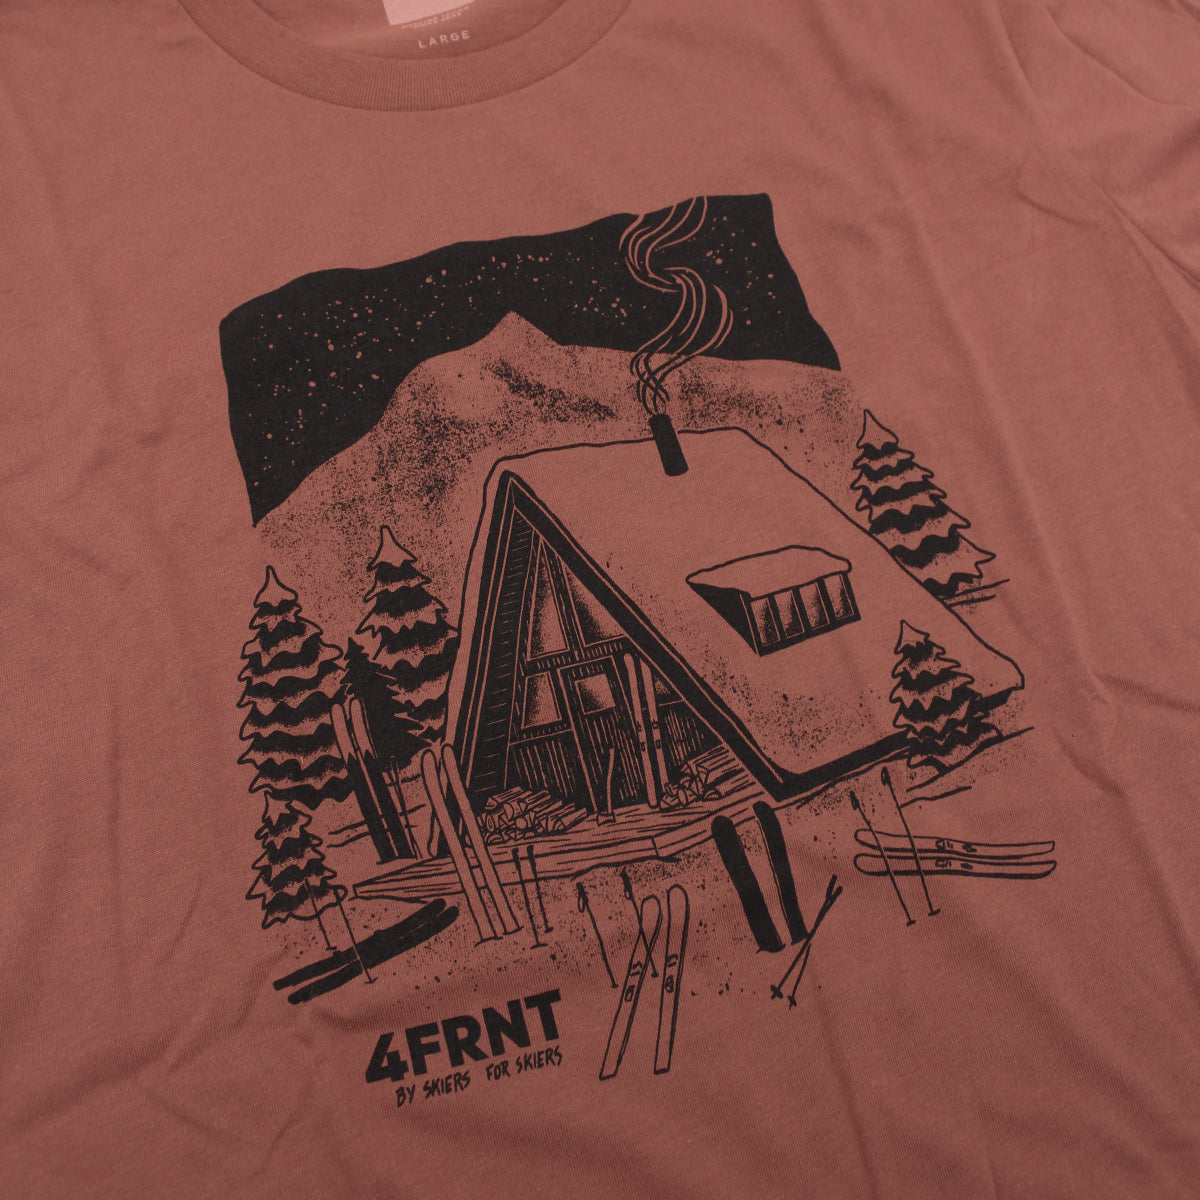 the detail view of the BC cabin shirt